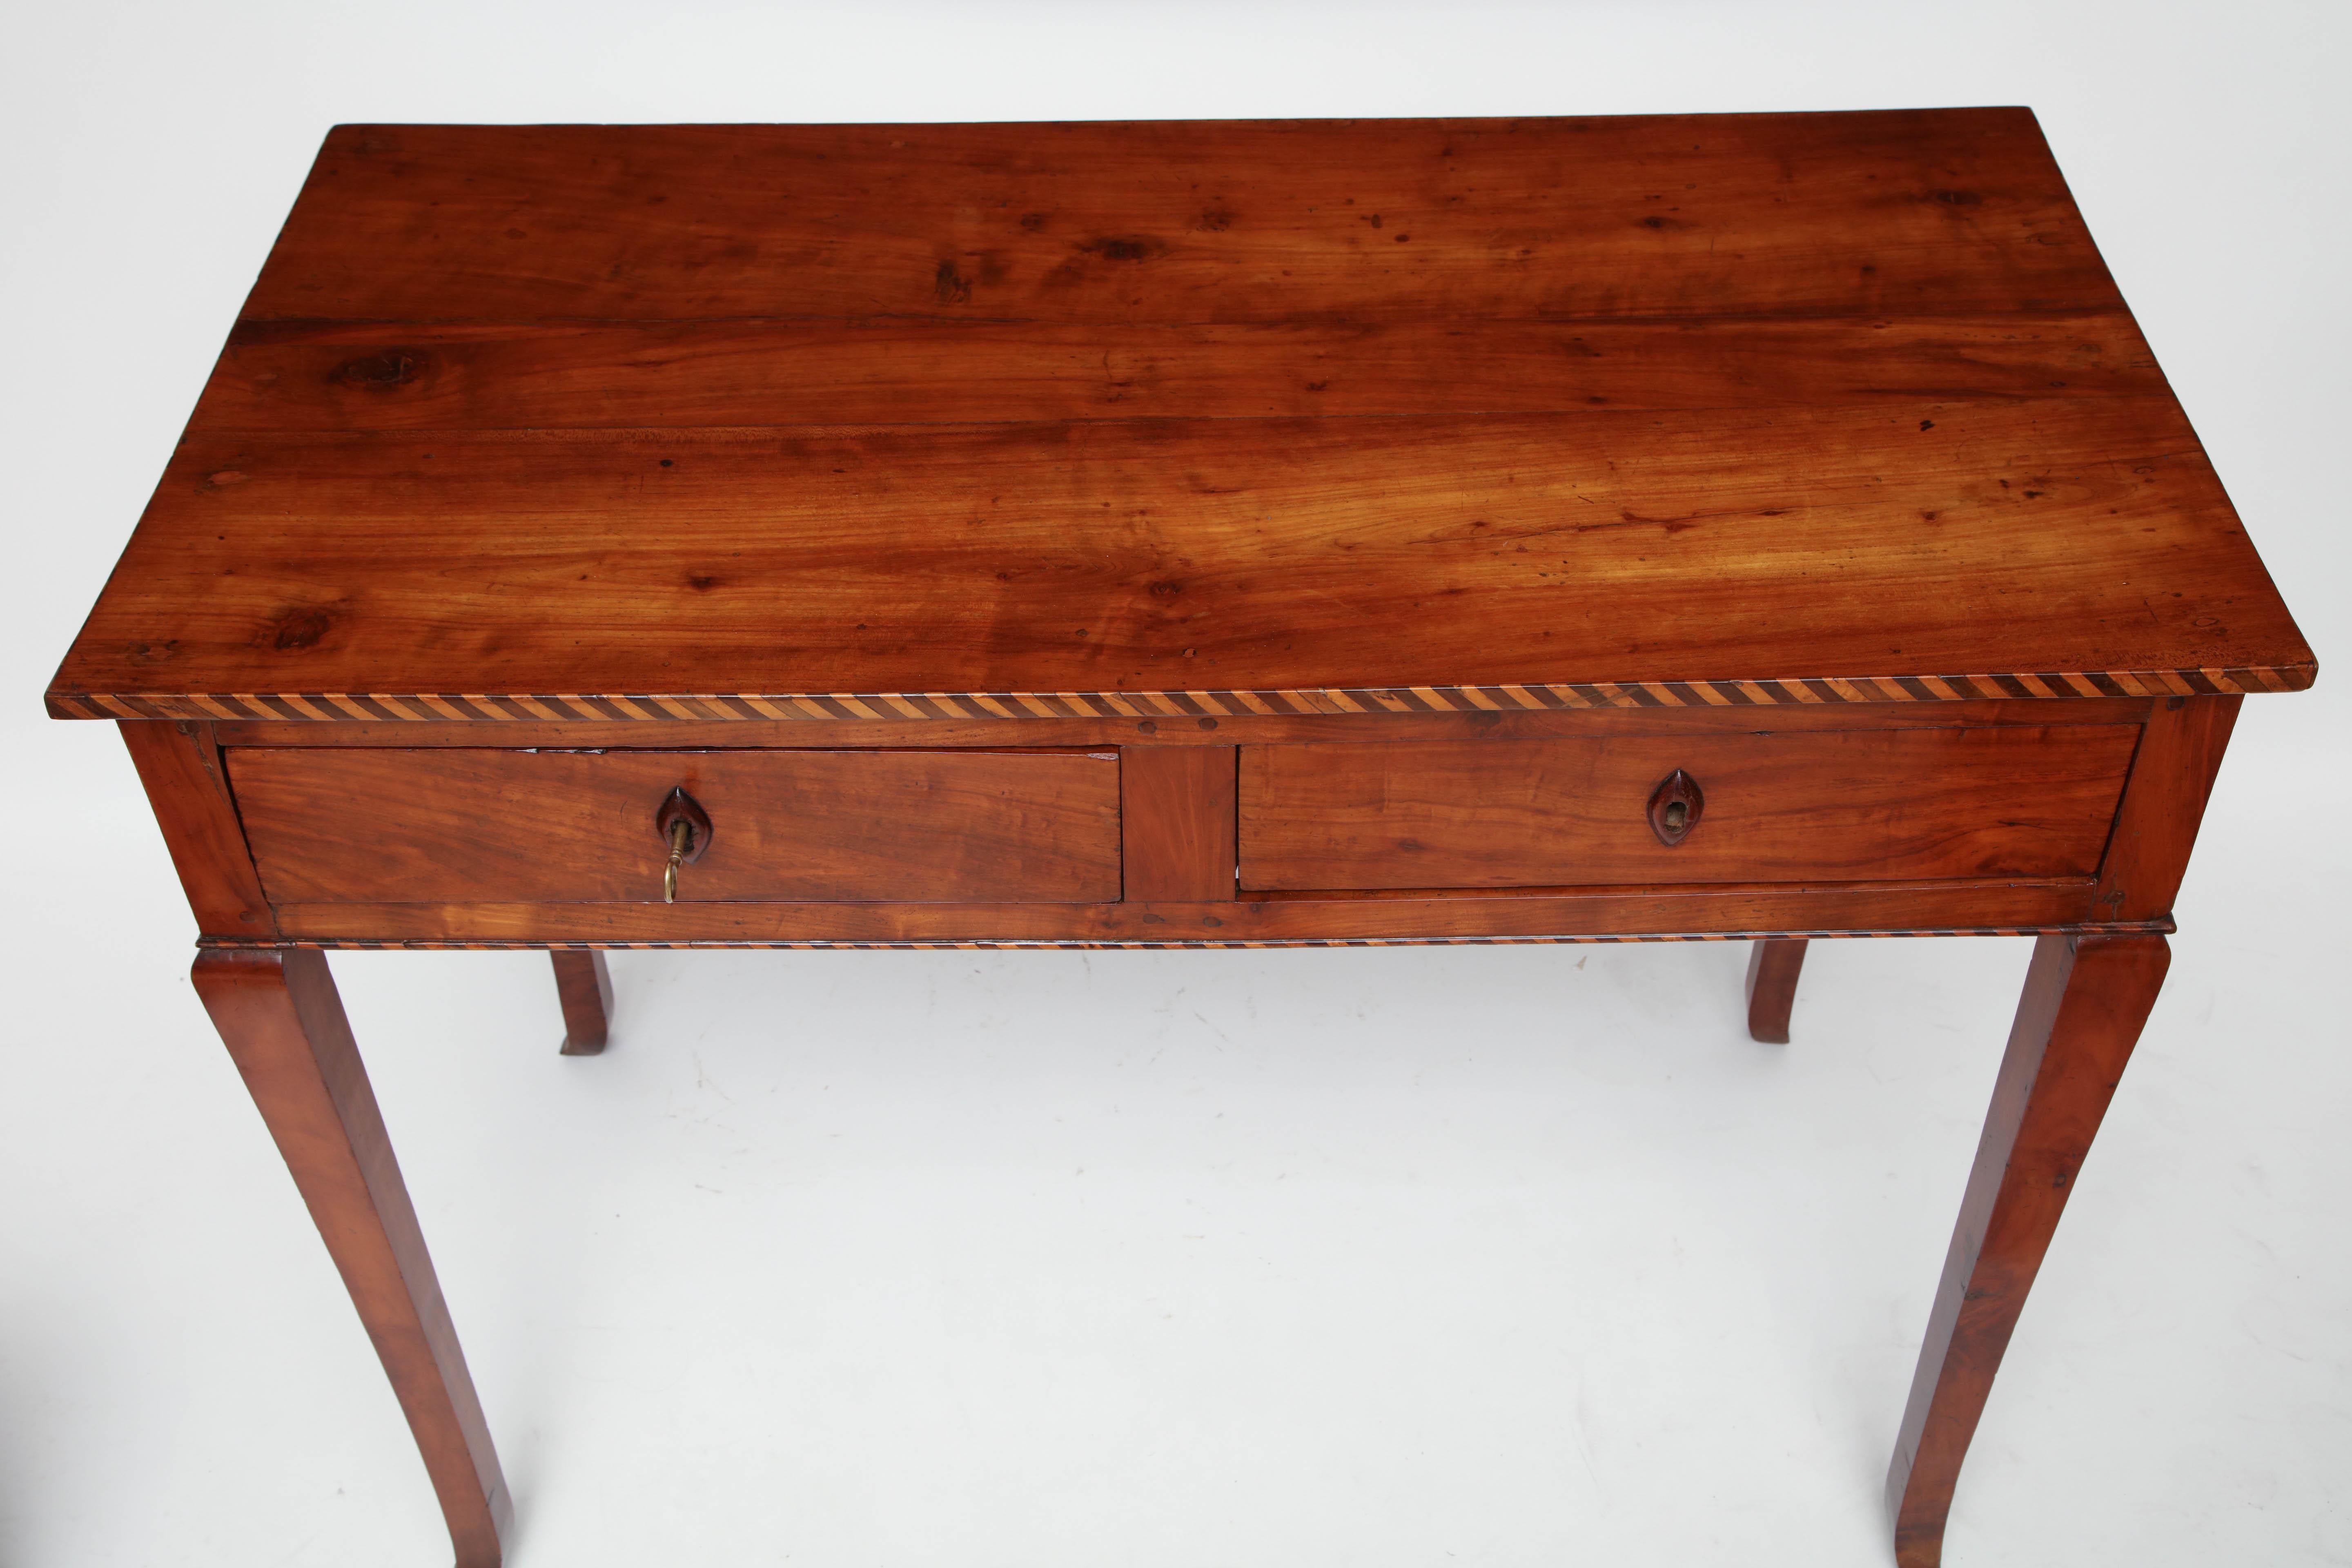 18th Century Italian Cherry Table with Parquetry Border and Two Drawers 3